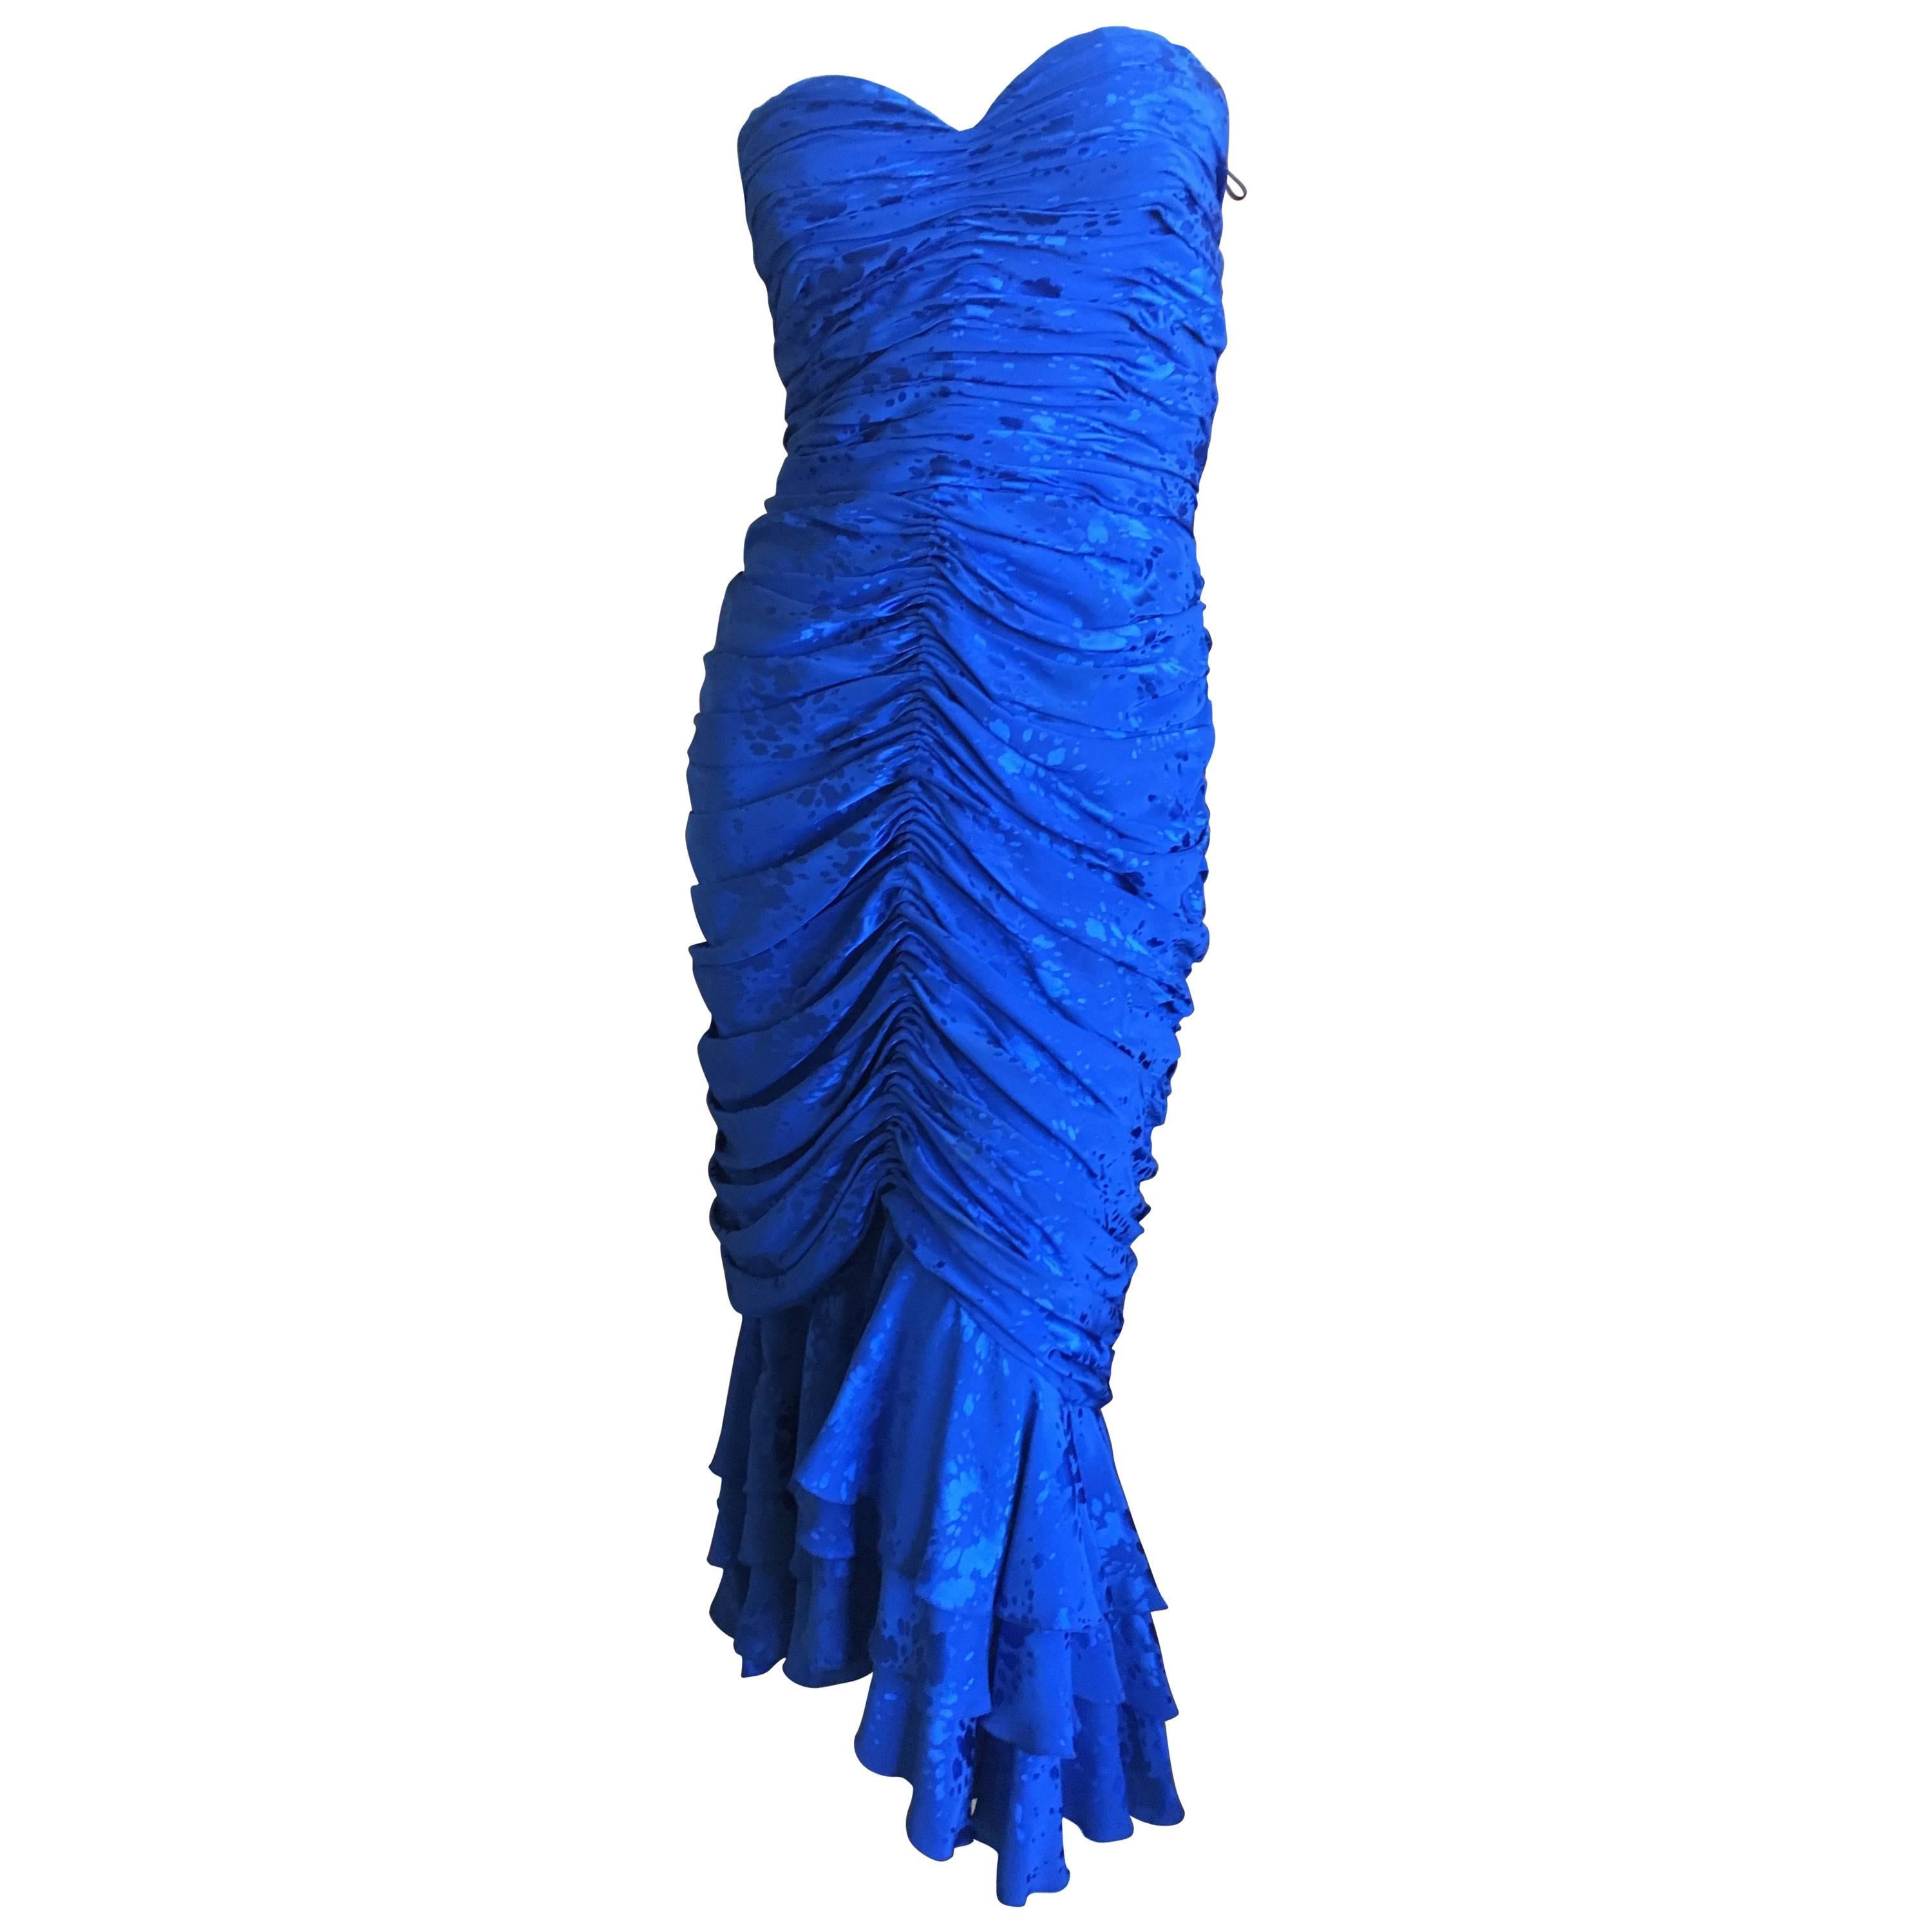 Loris Azzaro Couture 1970's Ruched Blue Silk Evening Dress For Sale